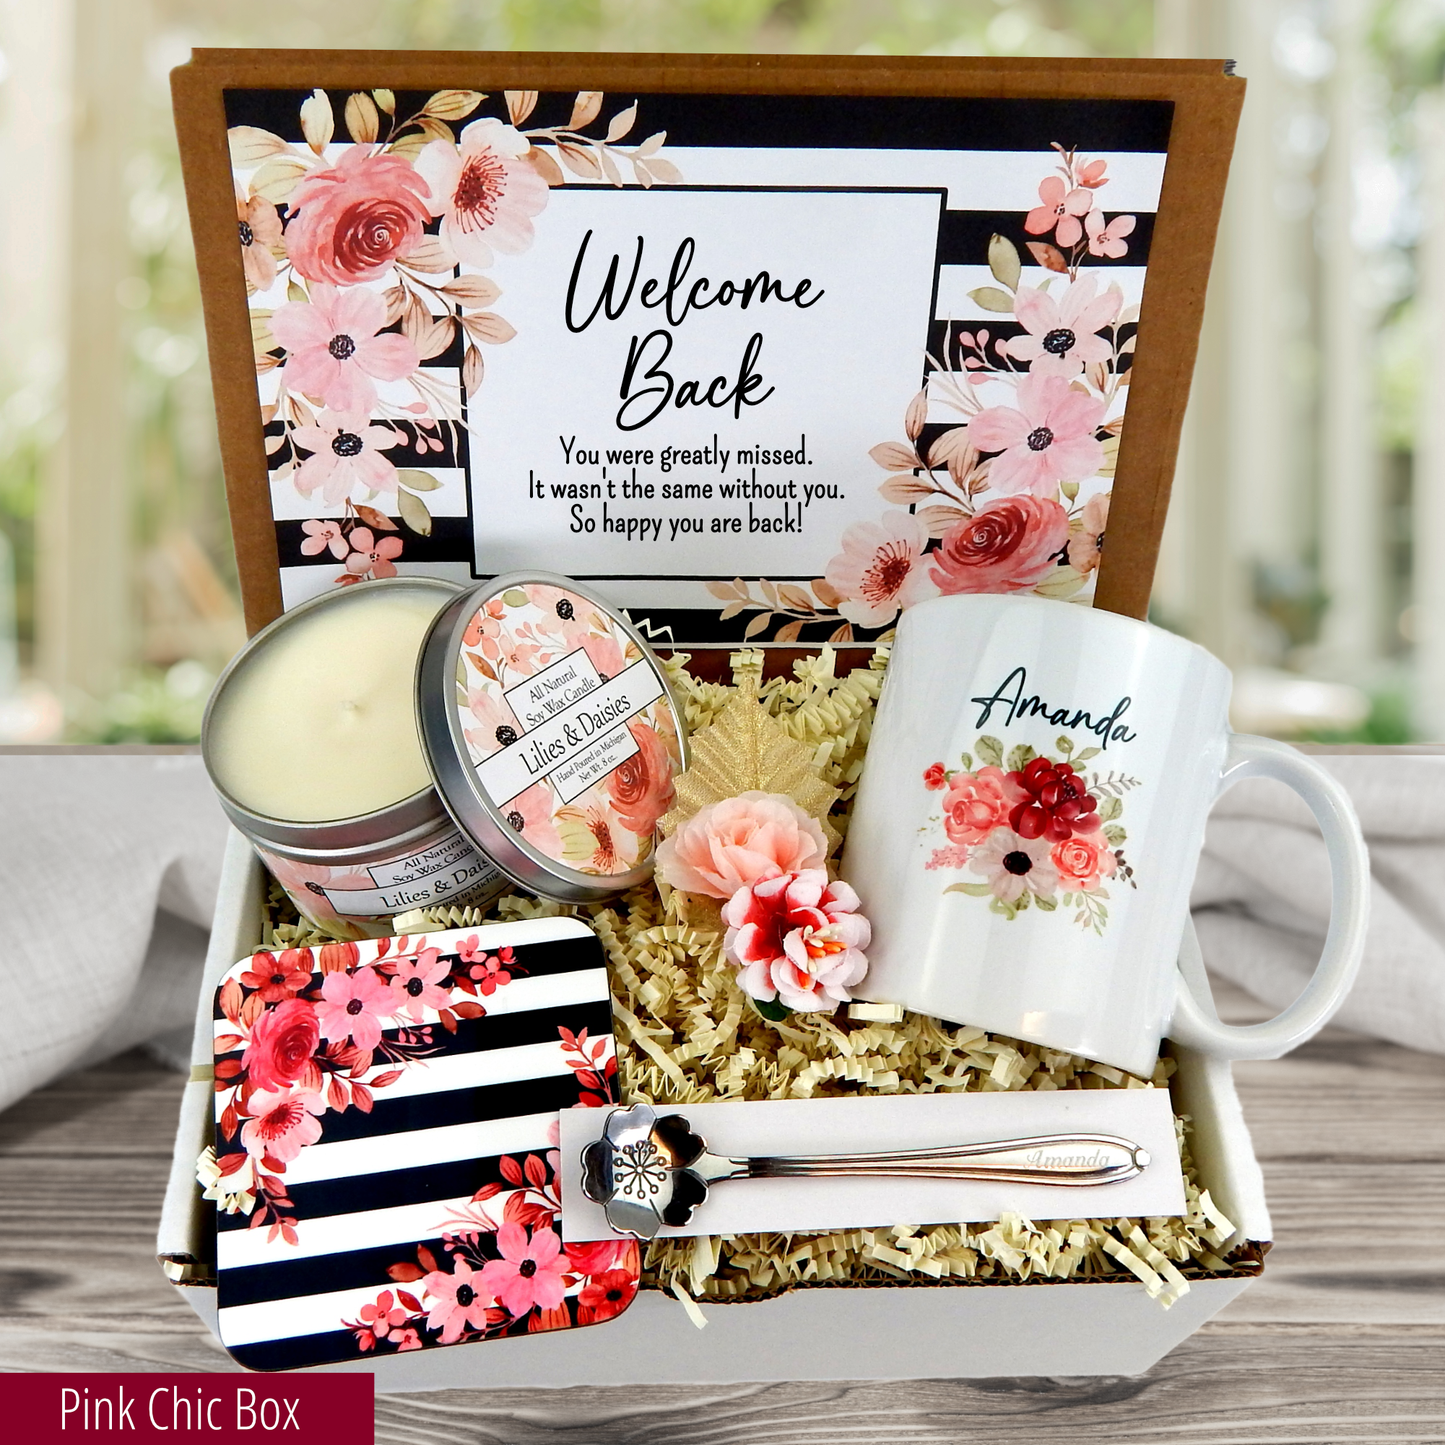 pink flower box welcome back gift basket with personalized mug